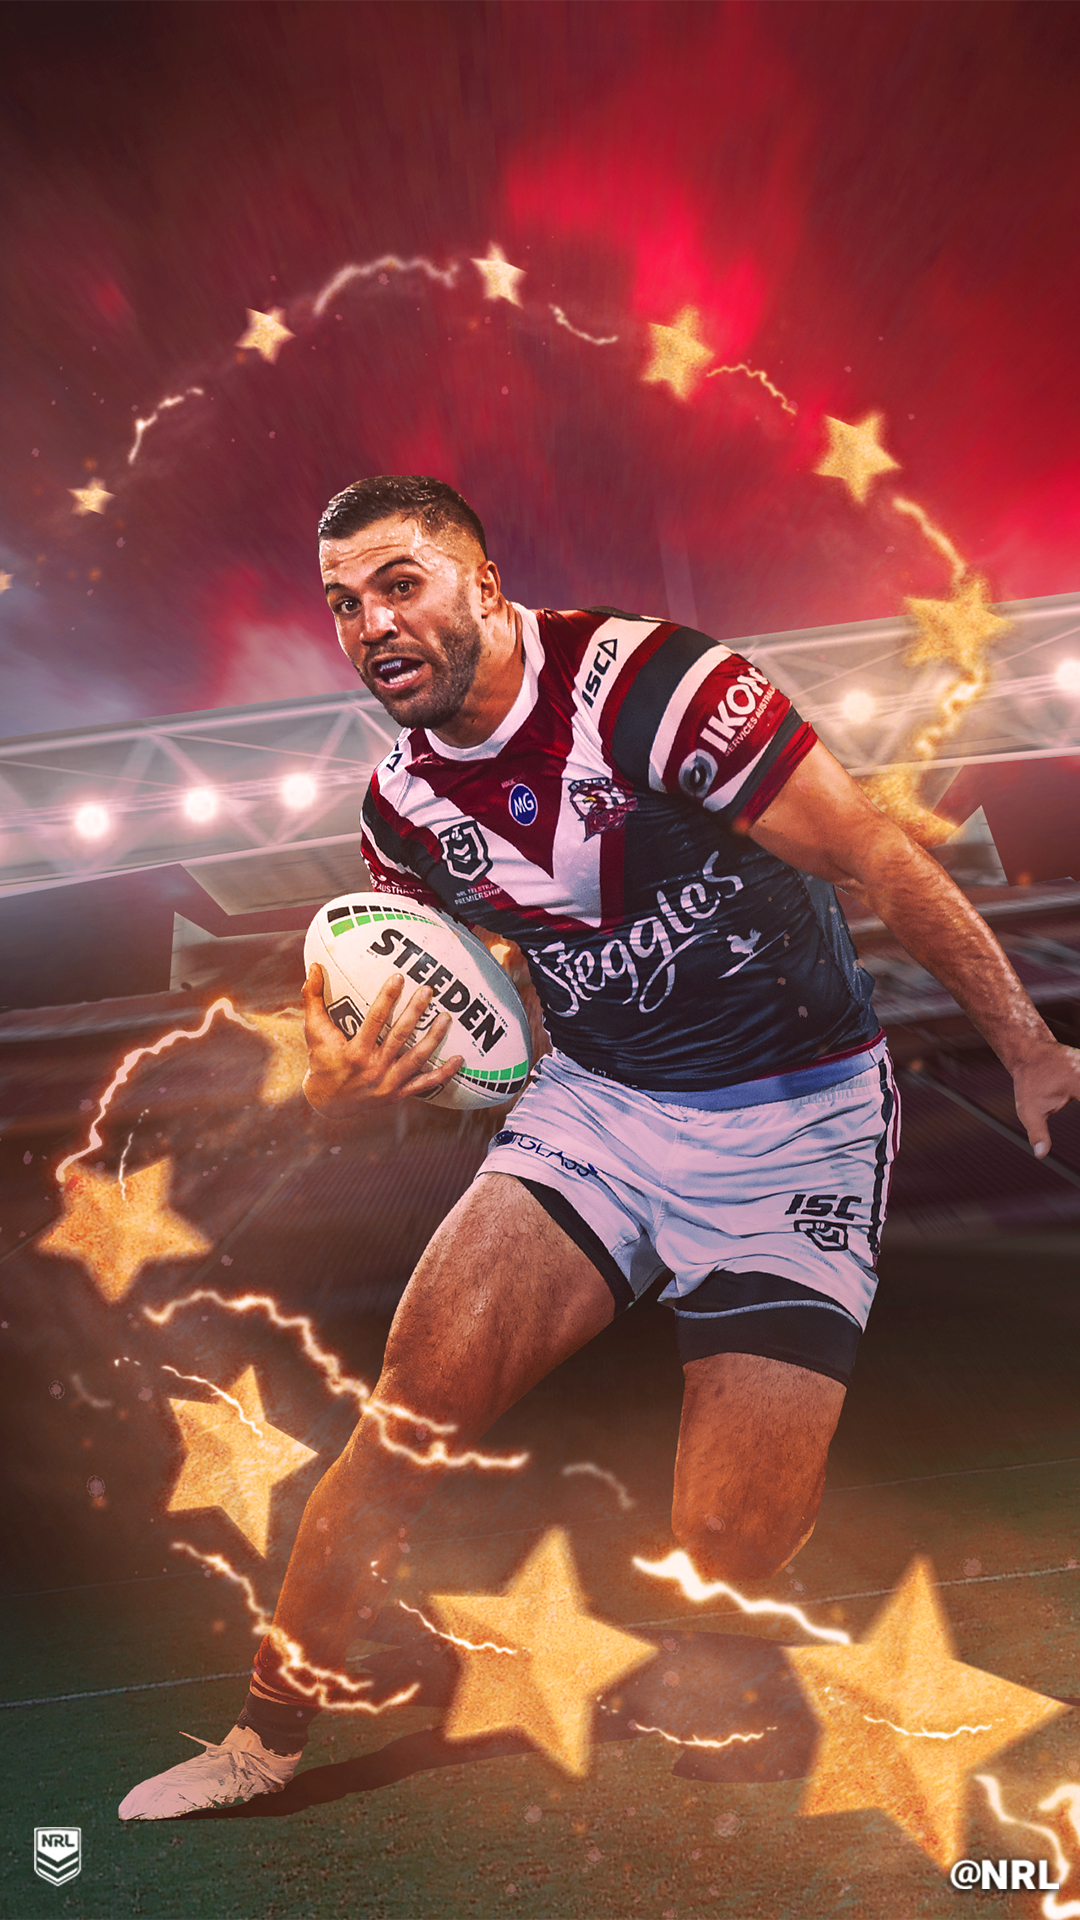 nrl wallpapers,football player,rugby player,rugby,rugby league,player